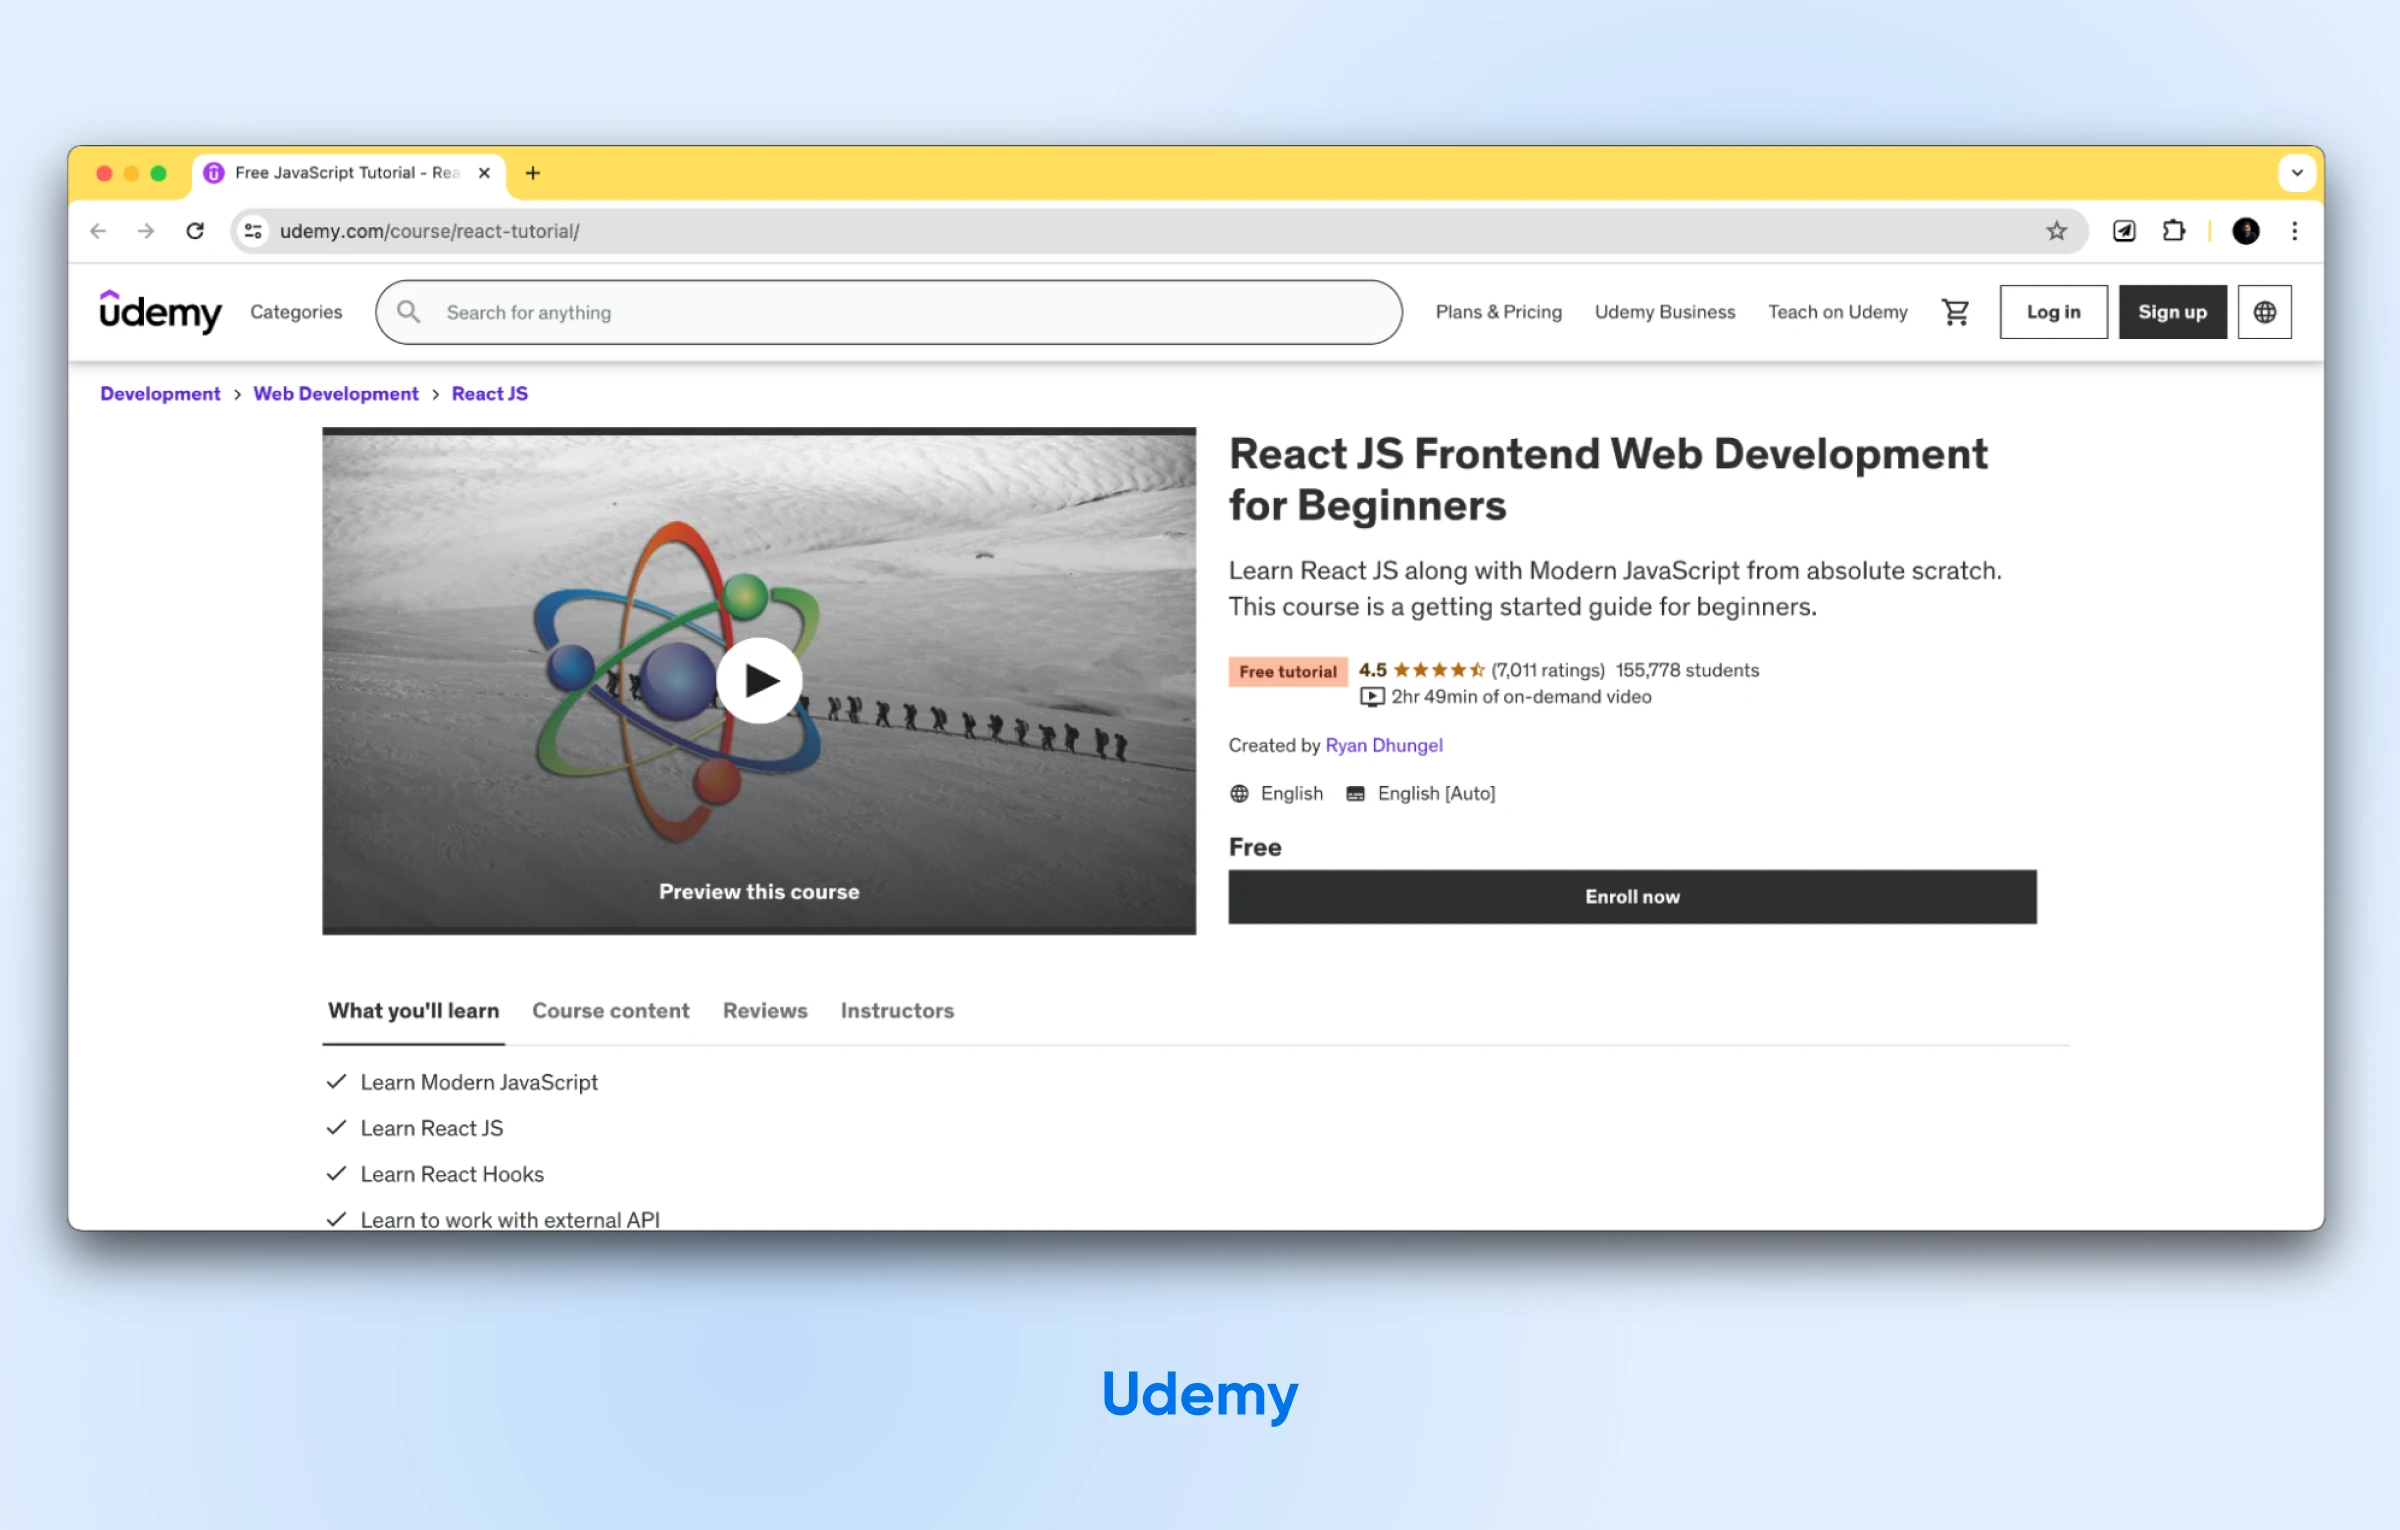 The React JS Frontend Web Development for Beginners course offers a video preview